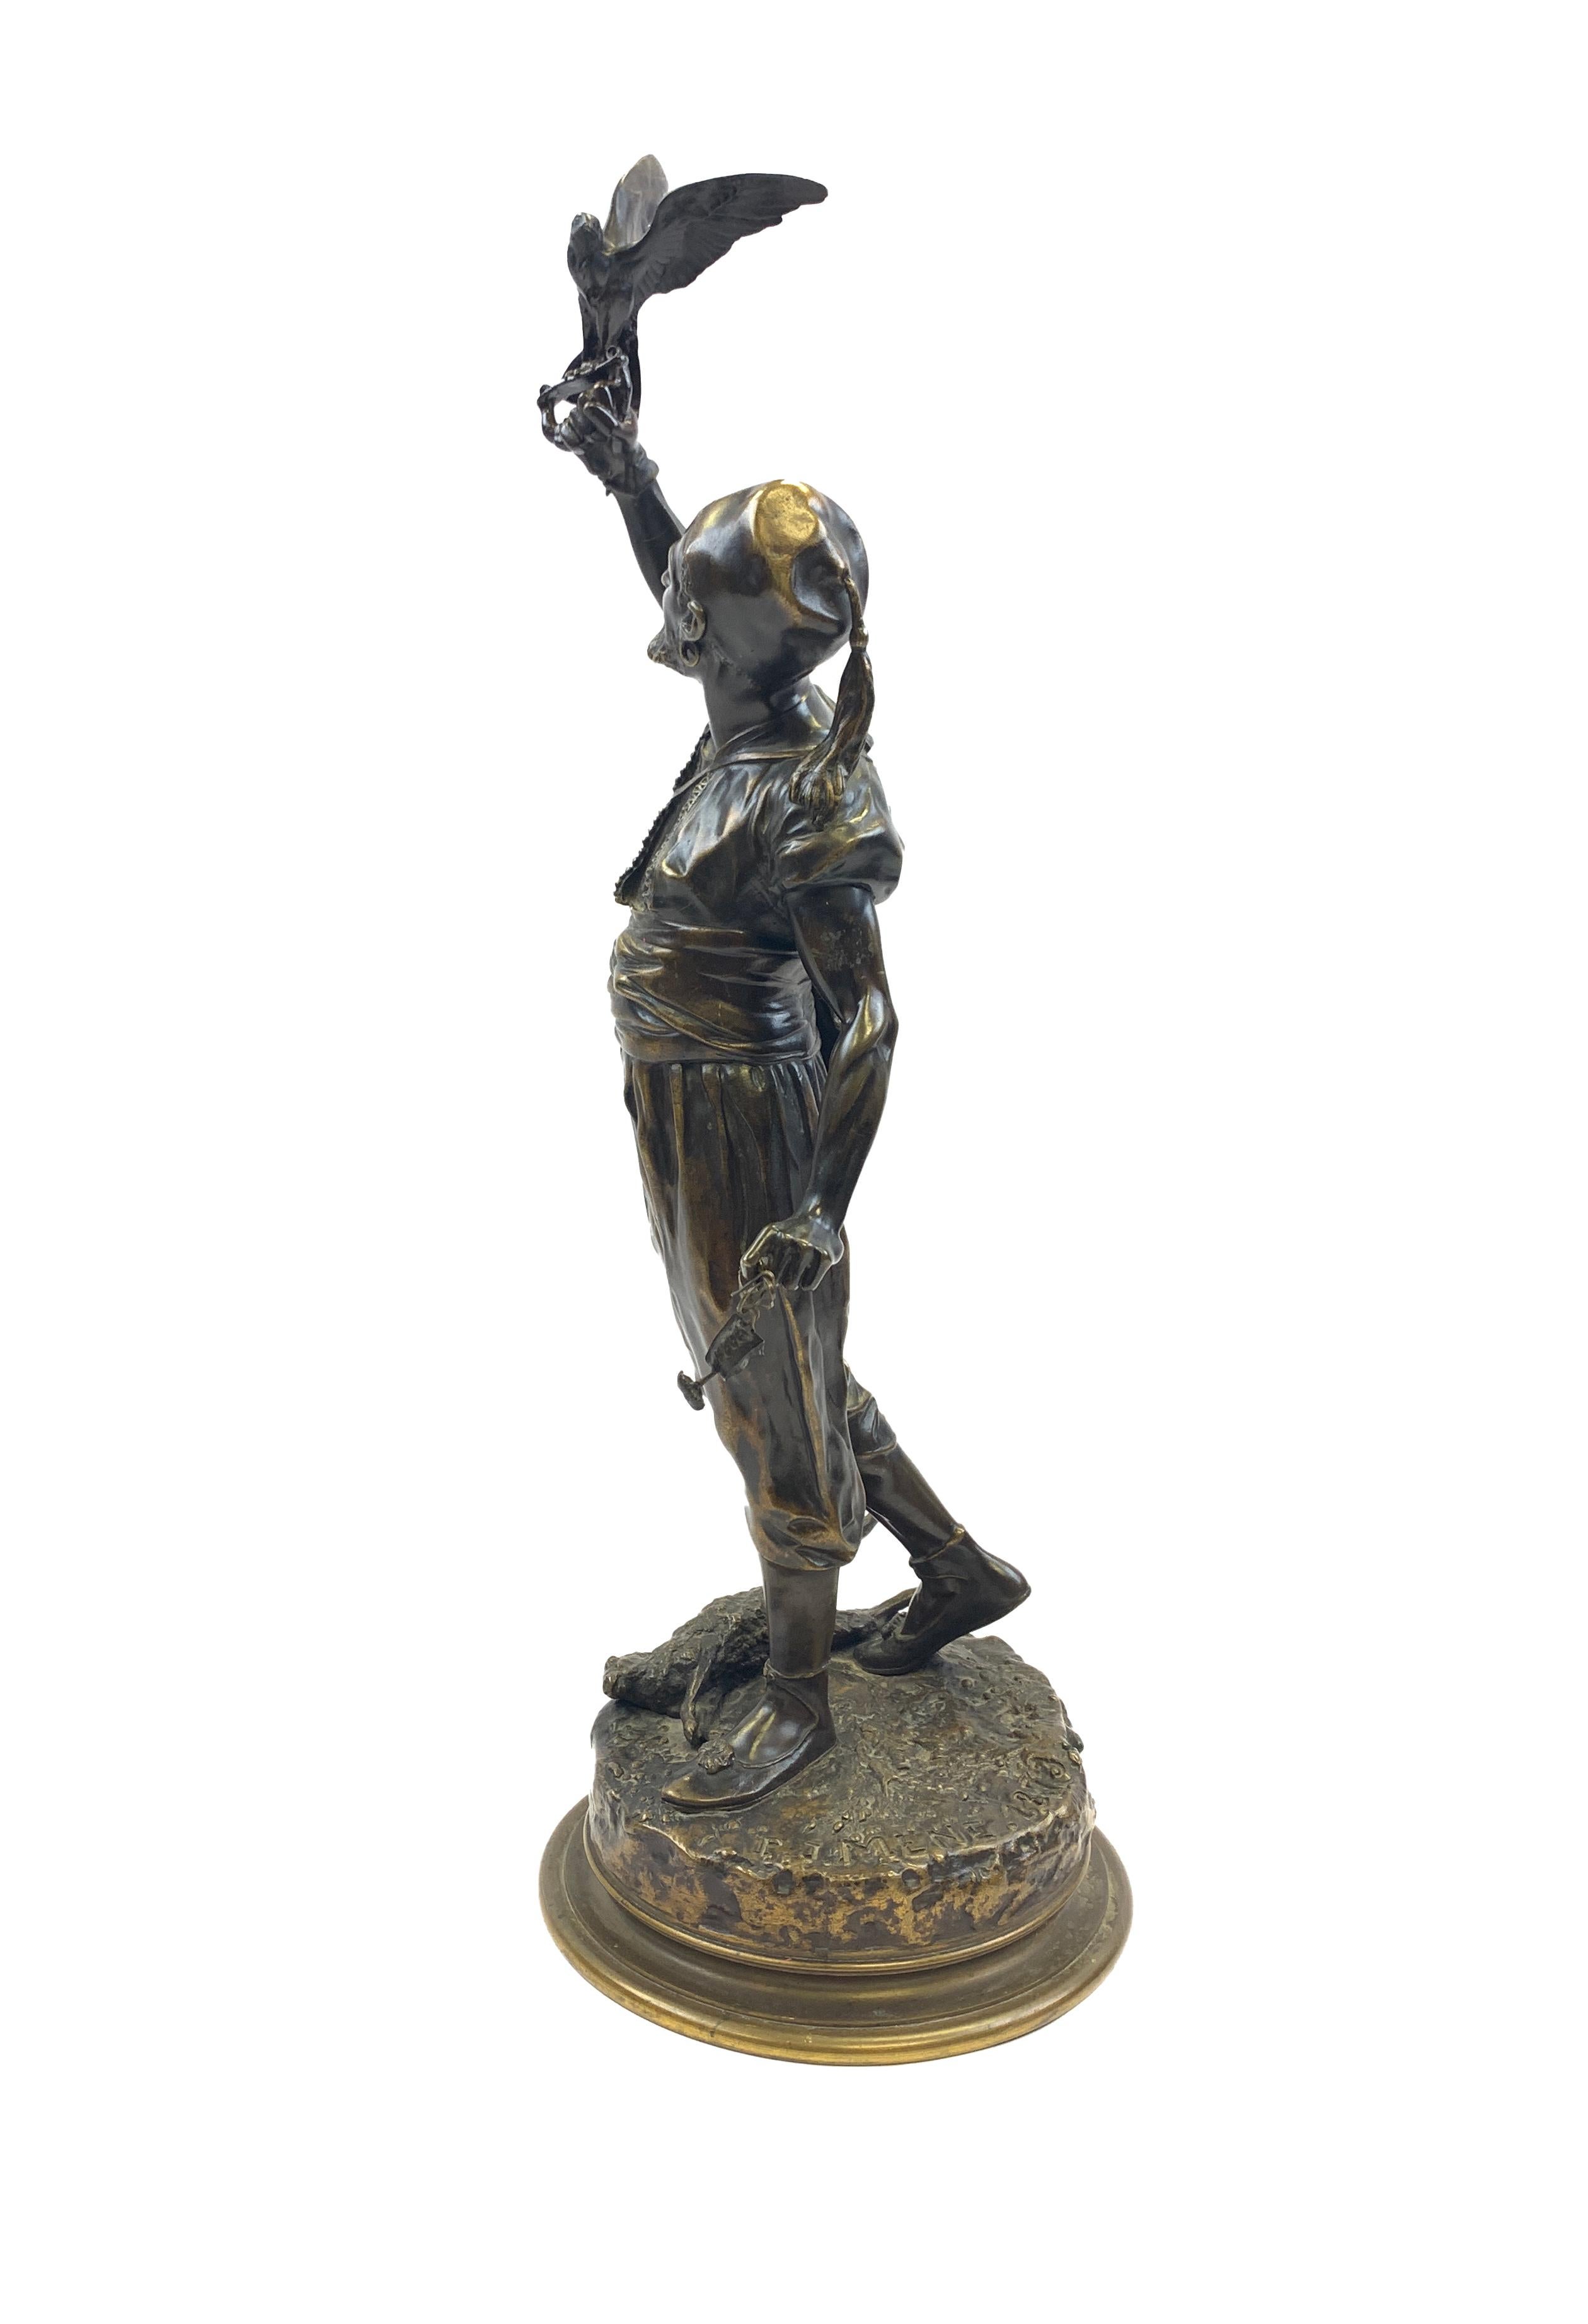 Bronze sculpture with brown patina, representing a man and his falcon, Signed P.J Mene & Dated 1873 on the round base.